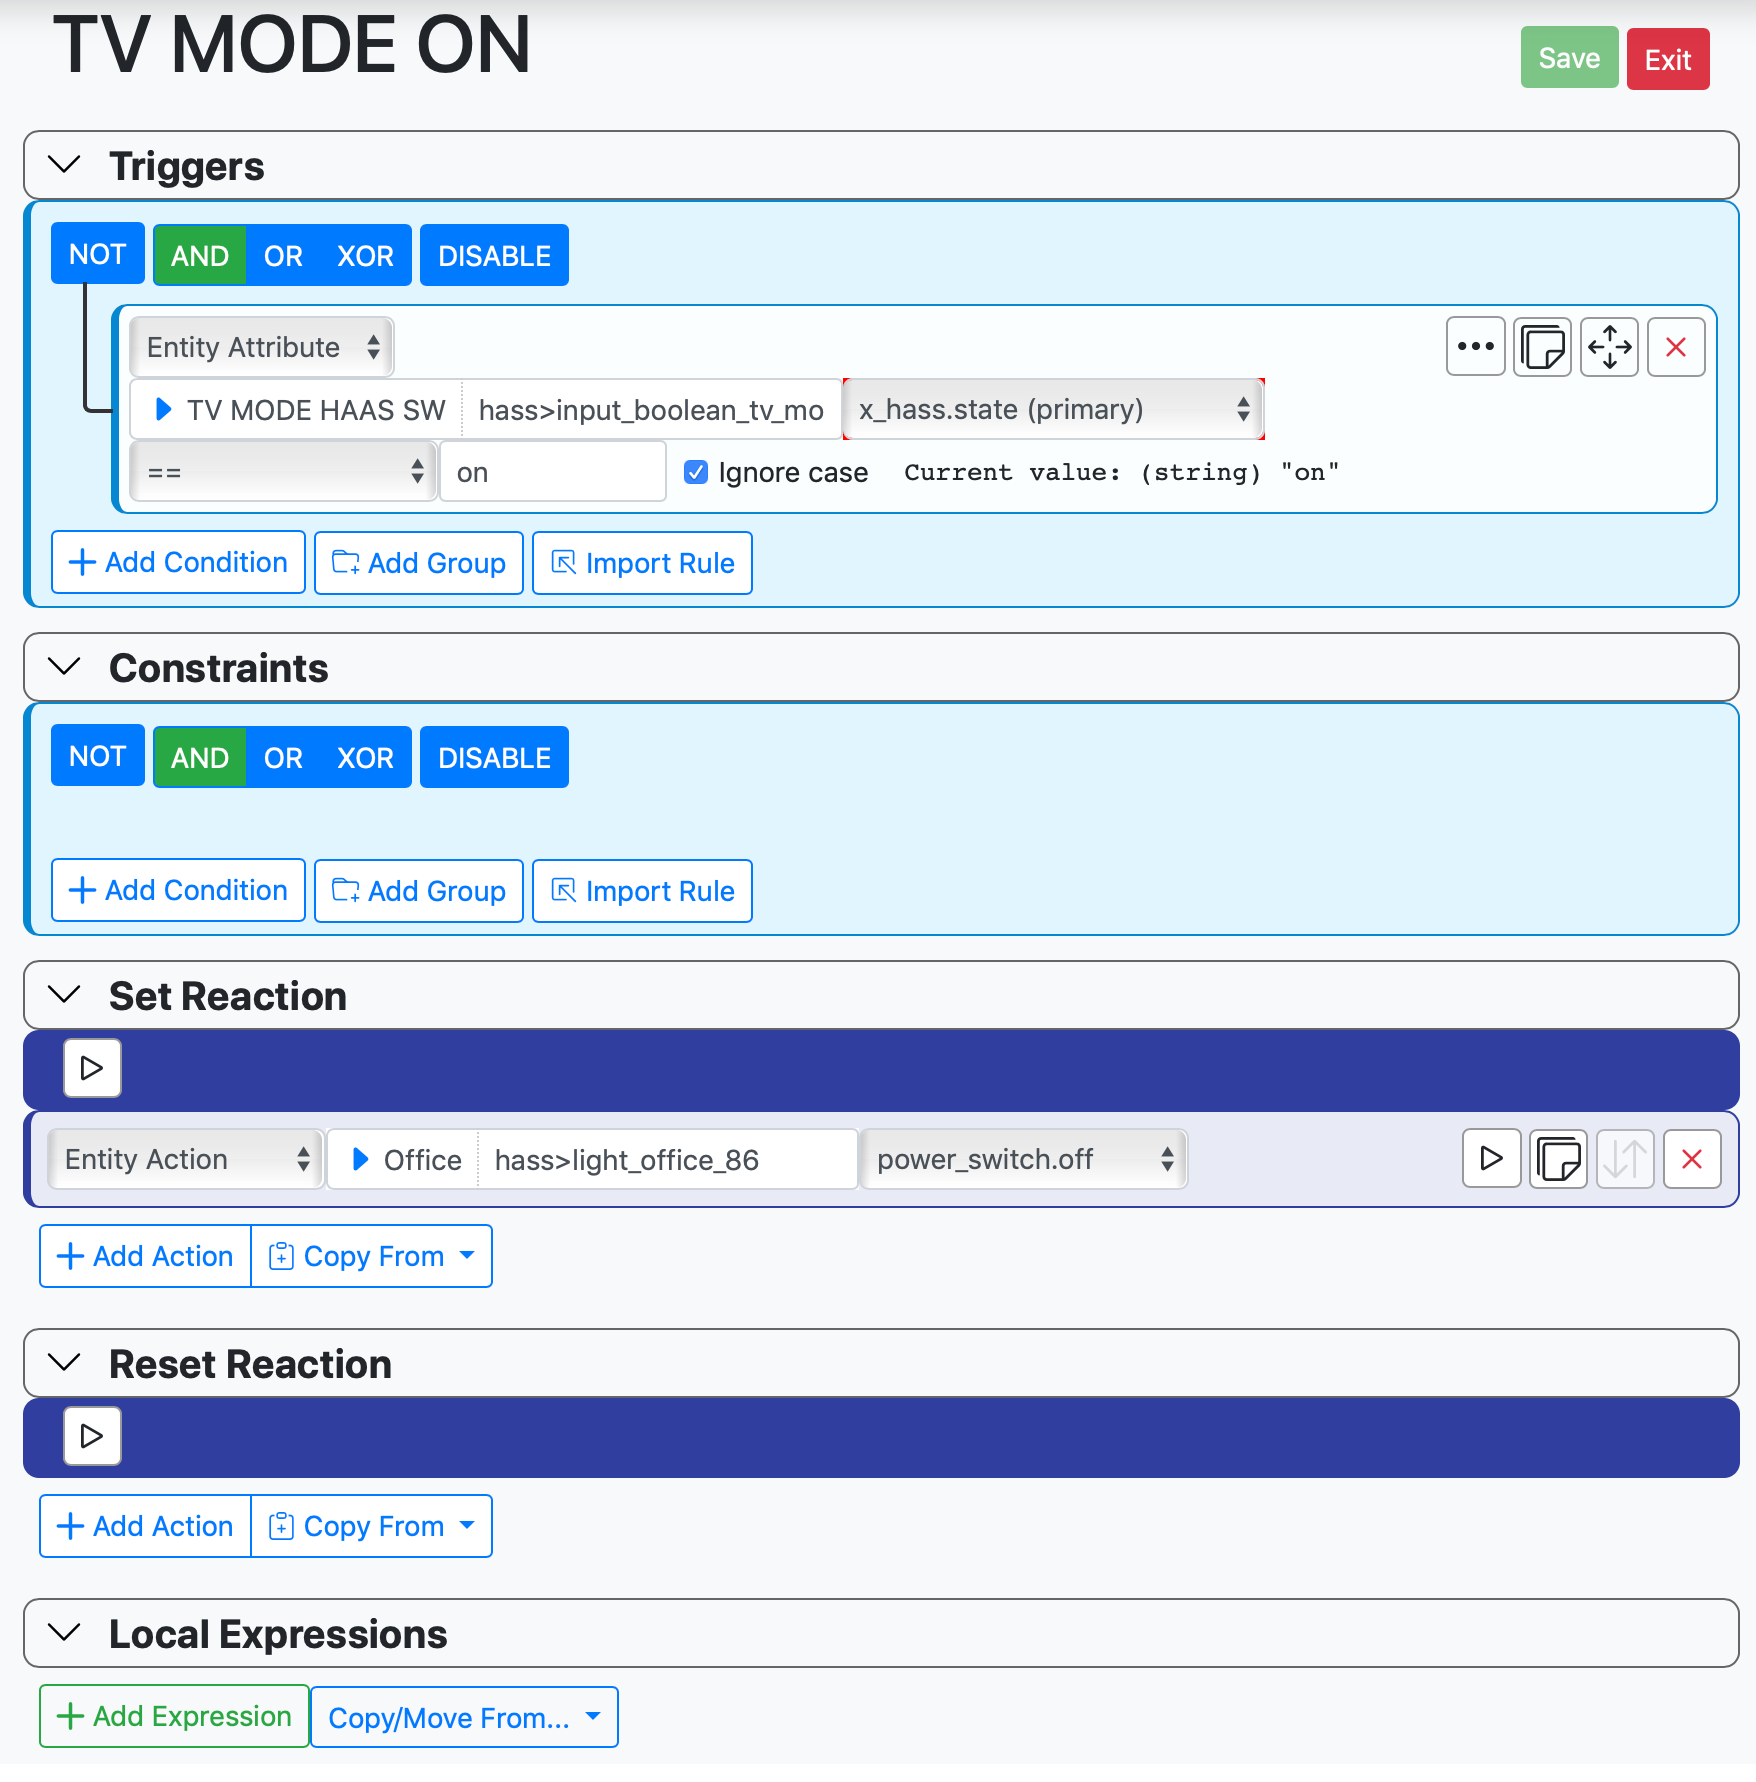 tv_mode_config.png